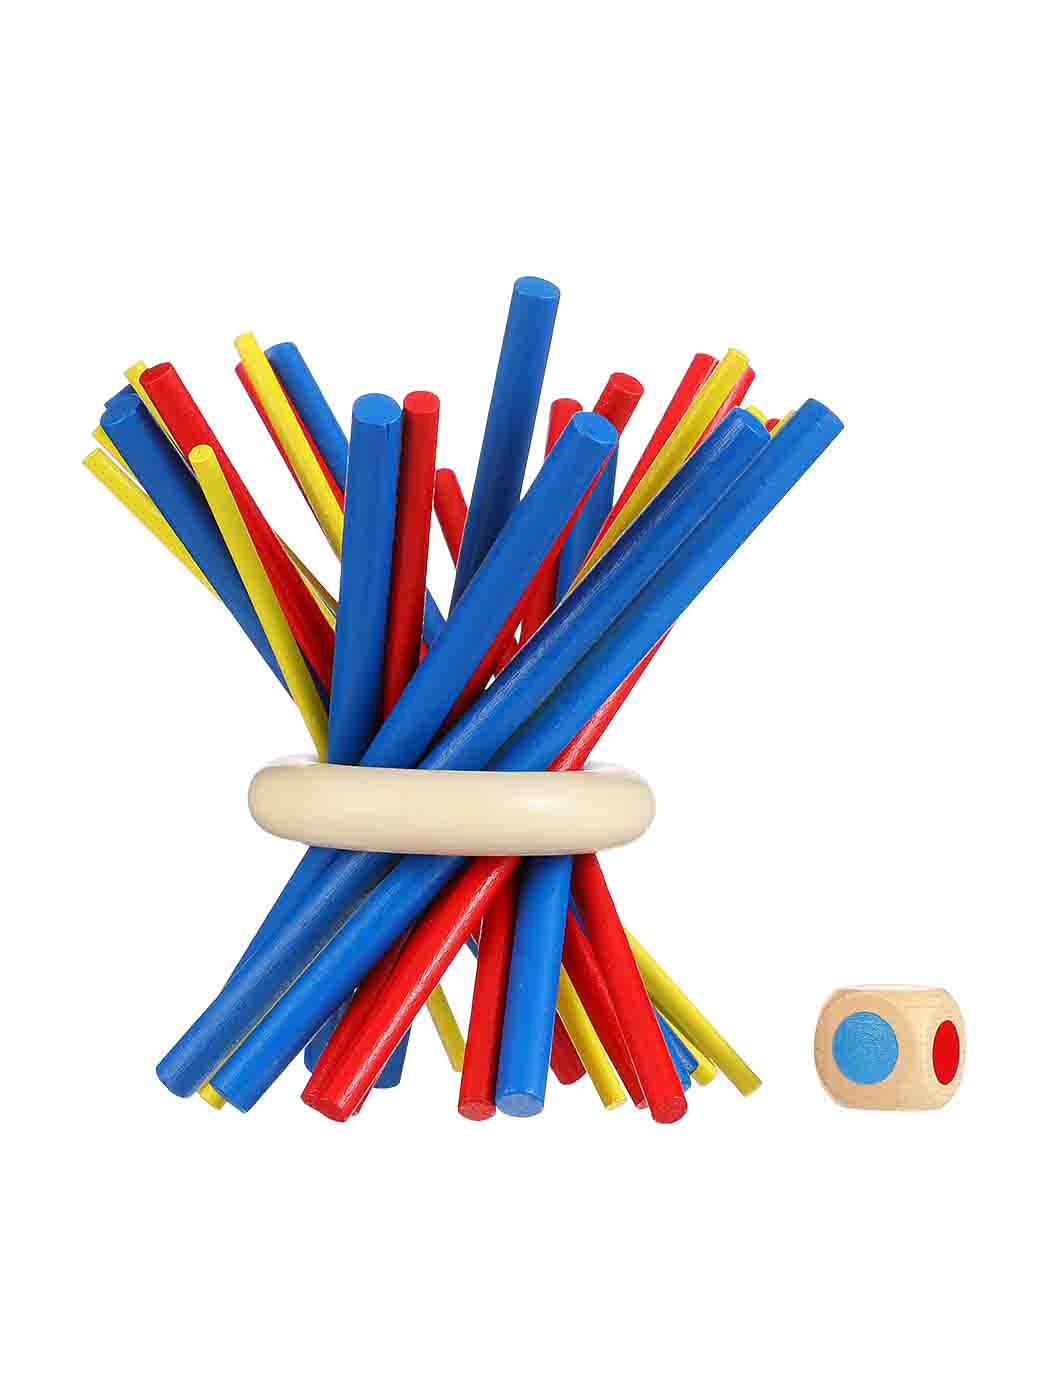 MINISO PICK UP STICKS 2010415610105 WOODEN TOY